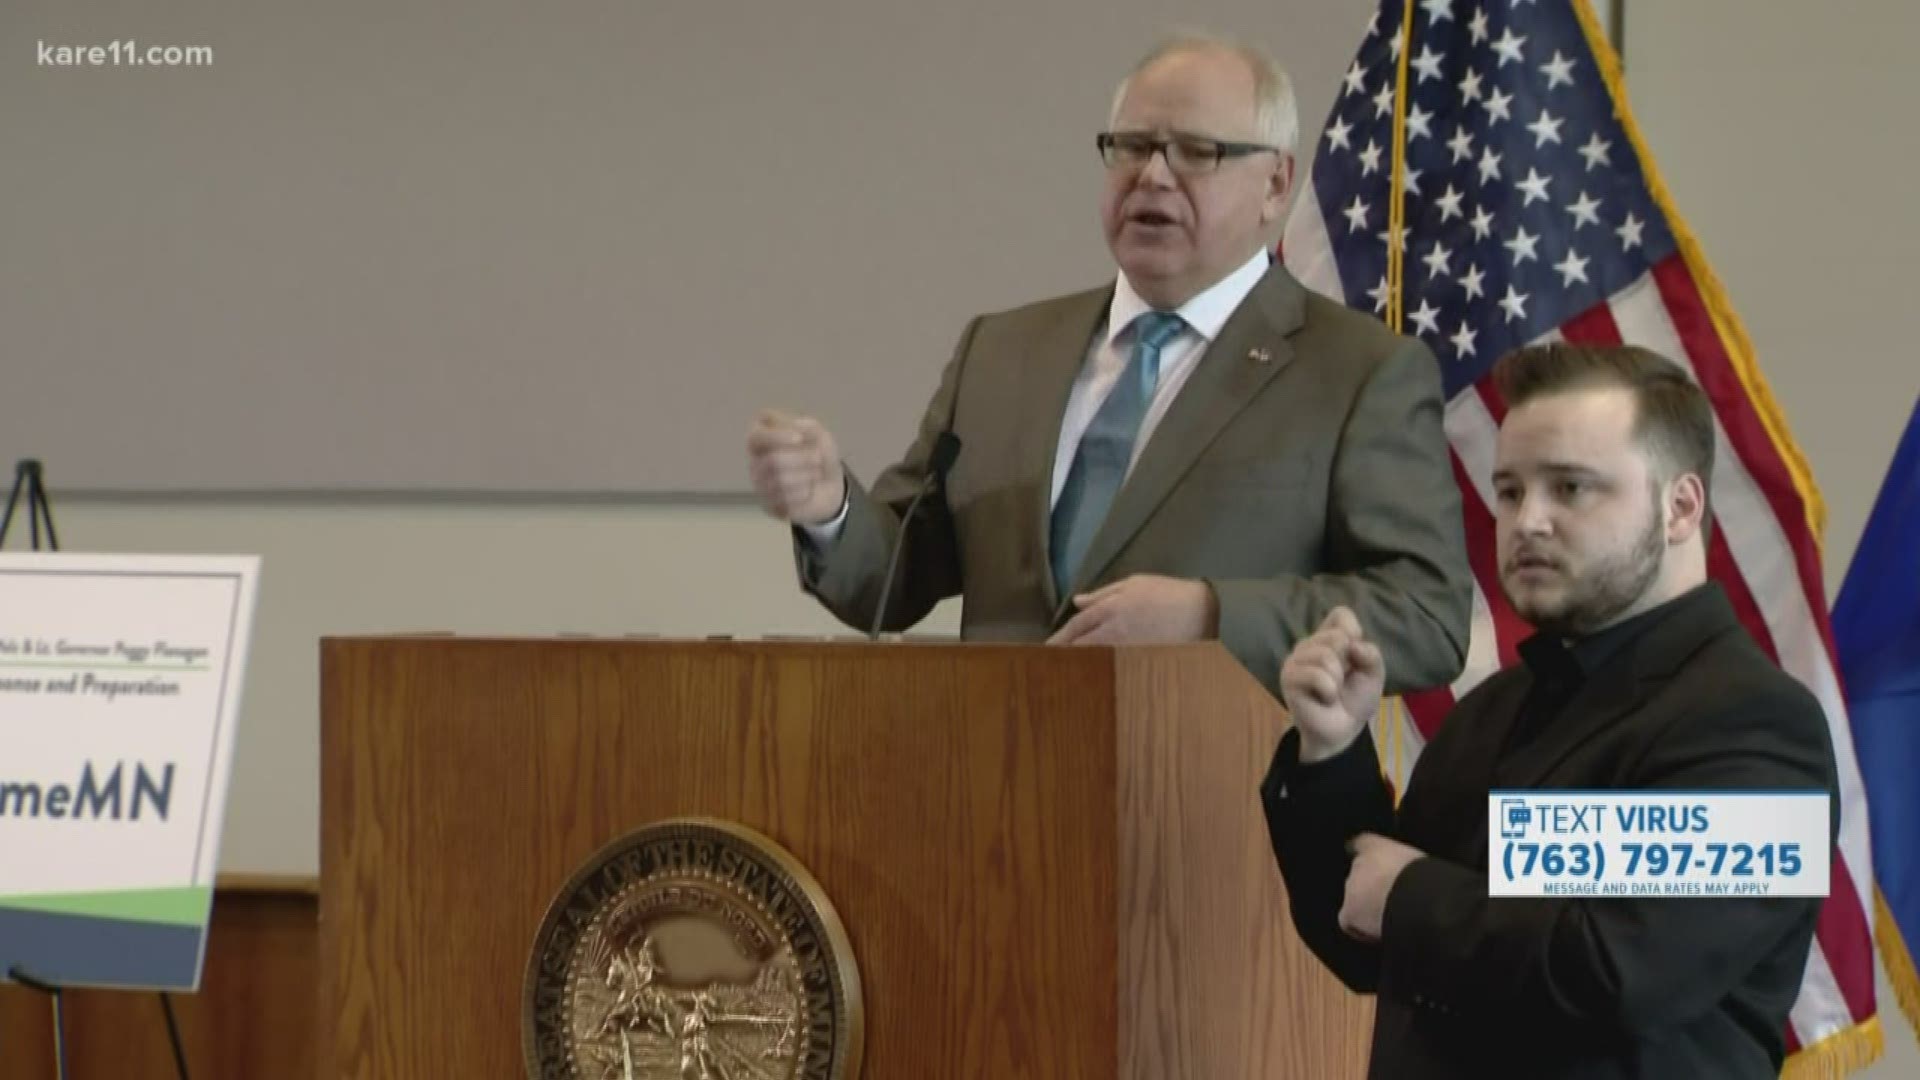 Gov. Tim Walz said we're all in this together as our state leaders work to stop the spread of coronavirus. The MDH says says we're up to at least 77 cases.